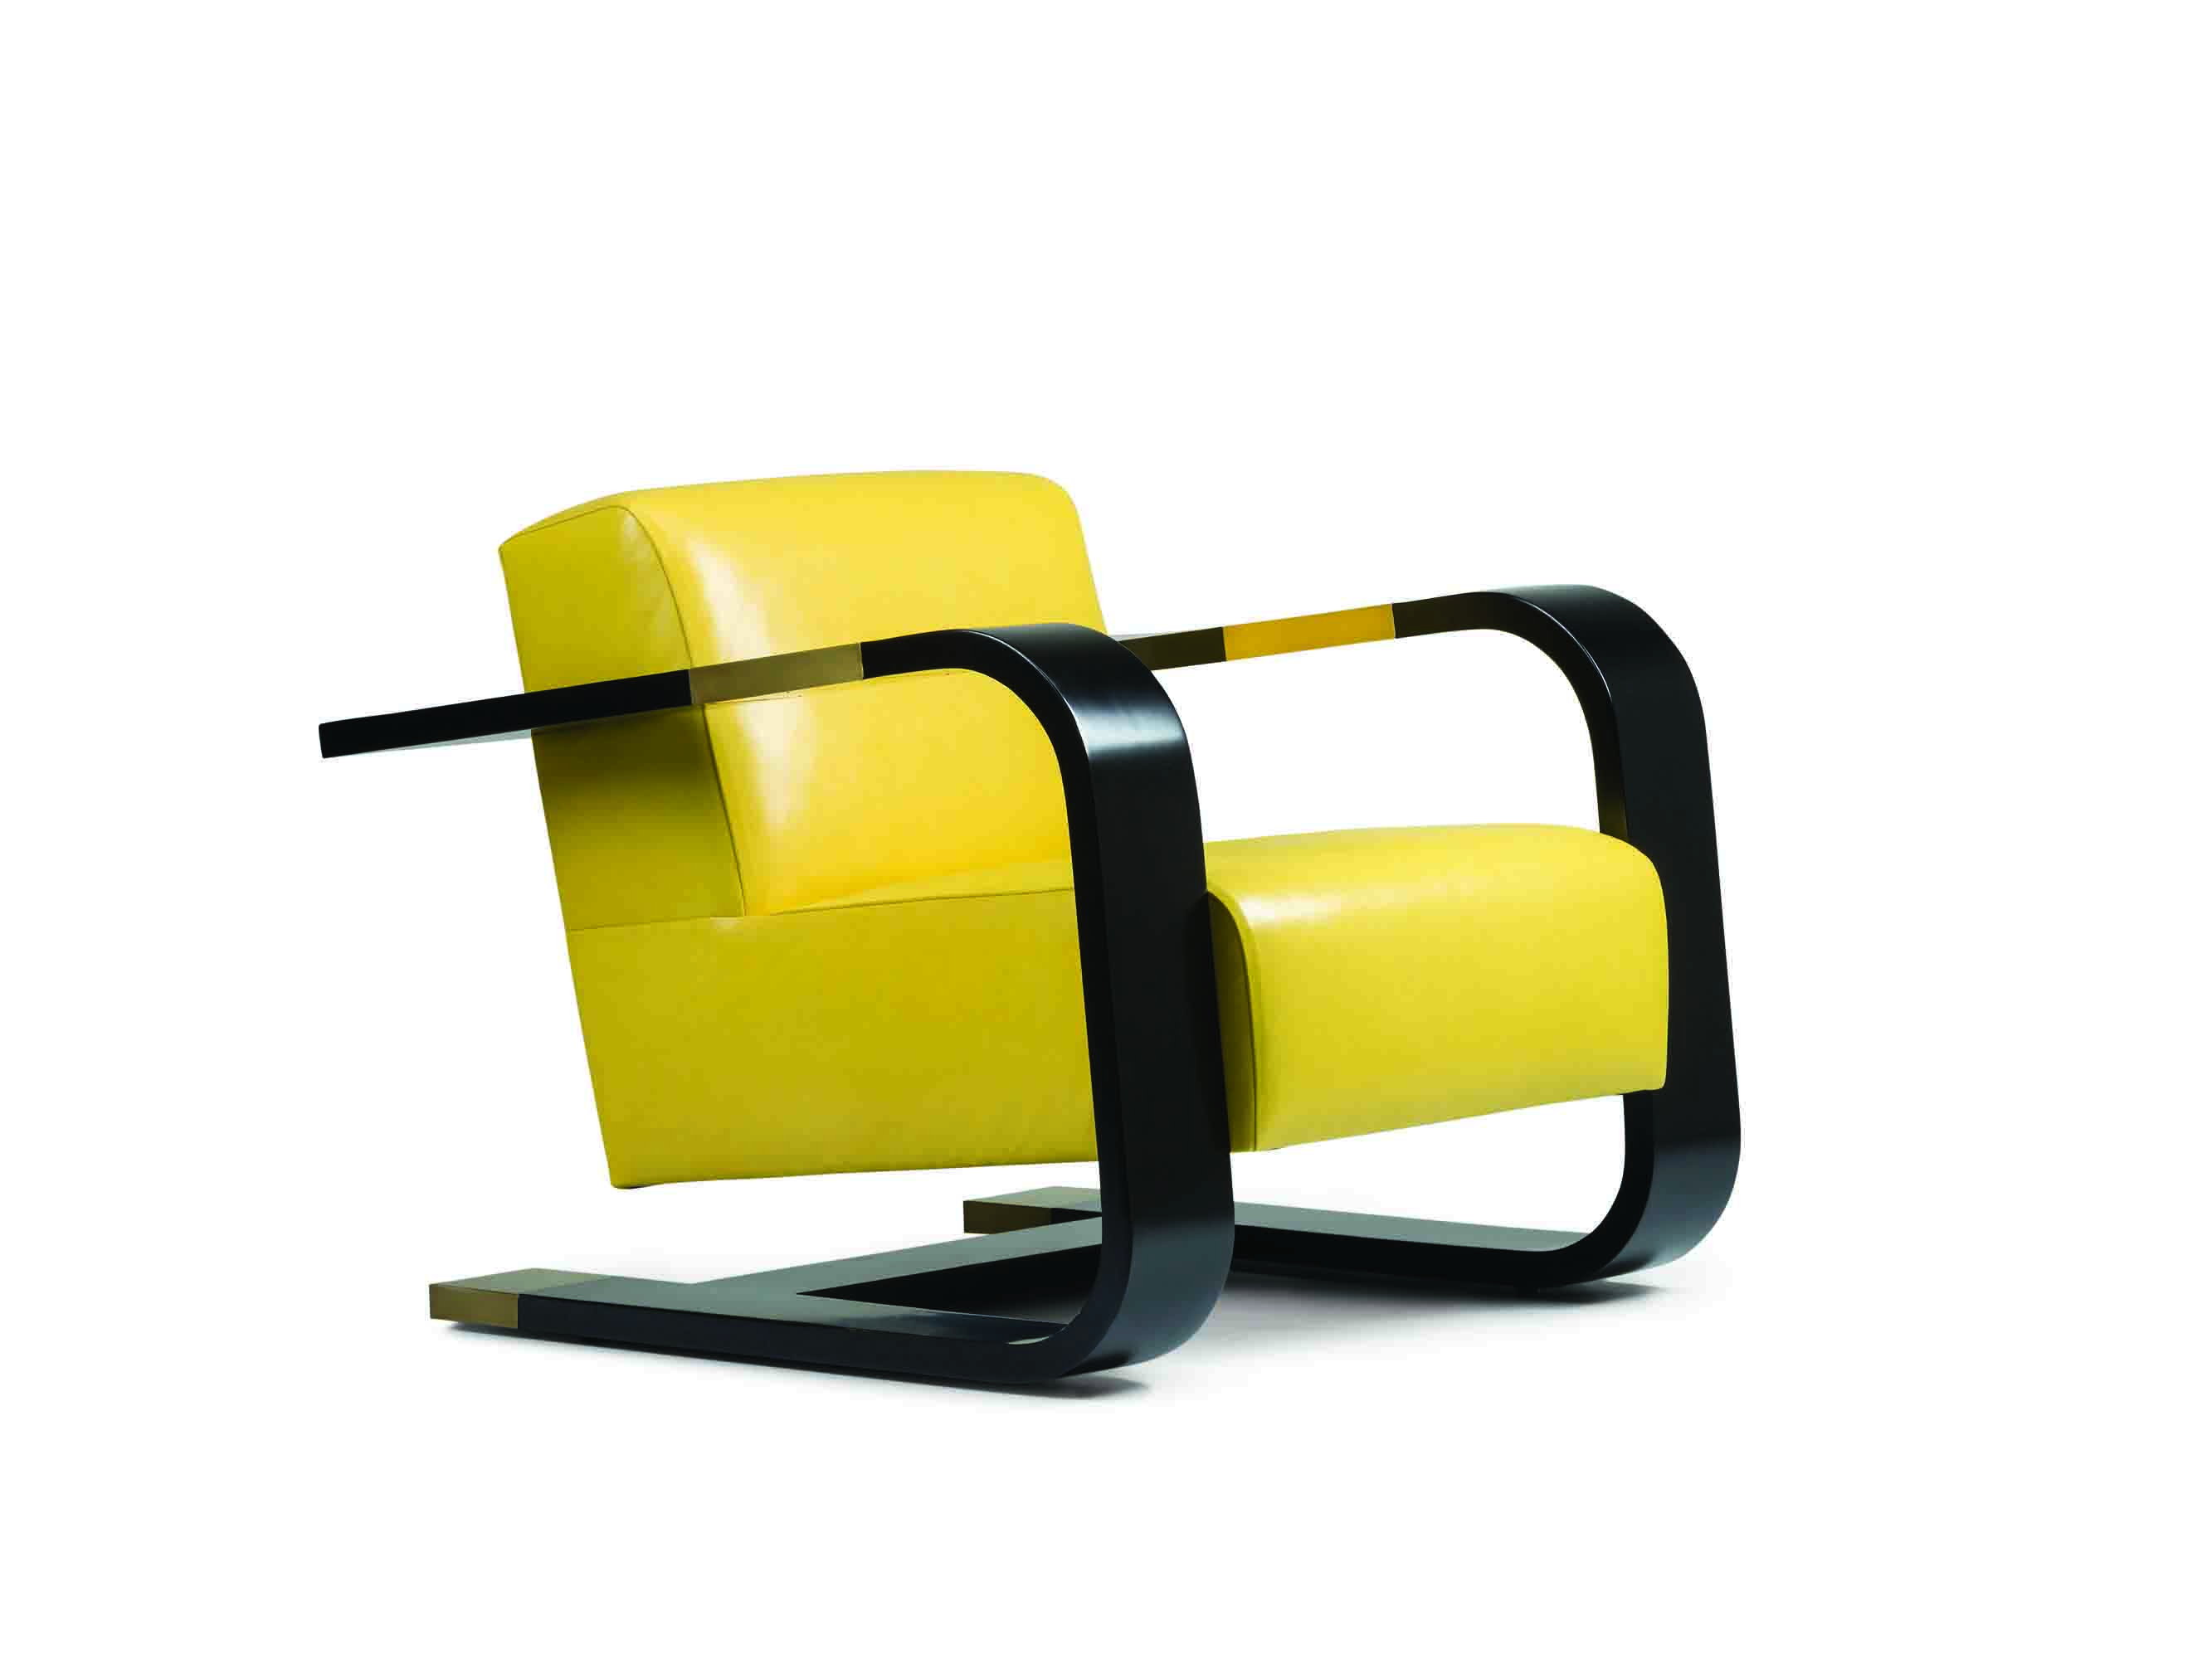 Carson Cantilevered Chair in the J Banks Collection for EJ Victor designed by Joni Vanderslice